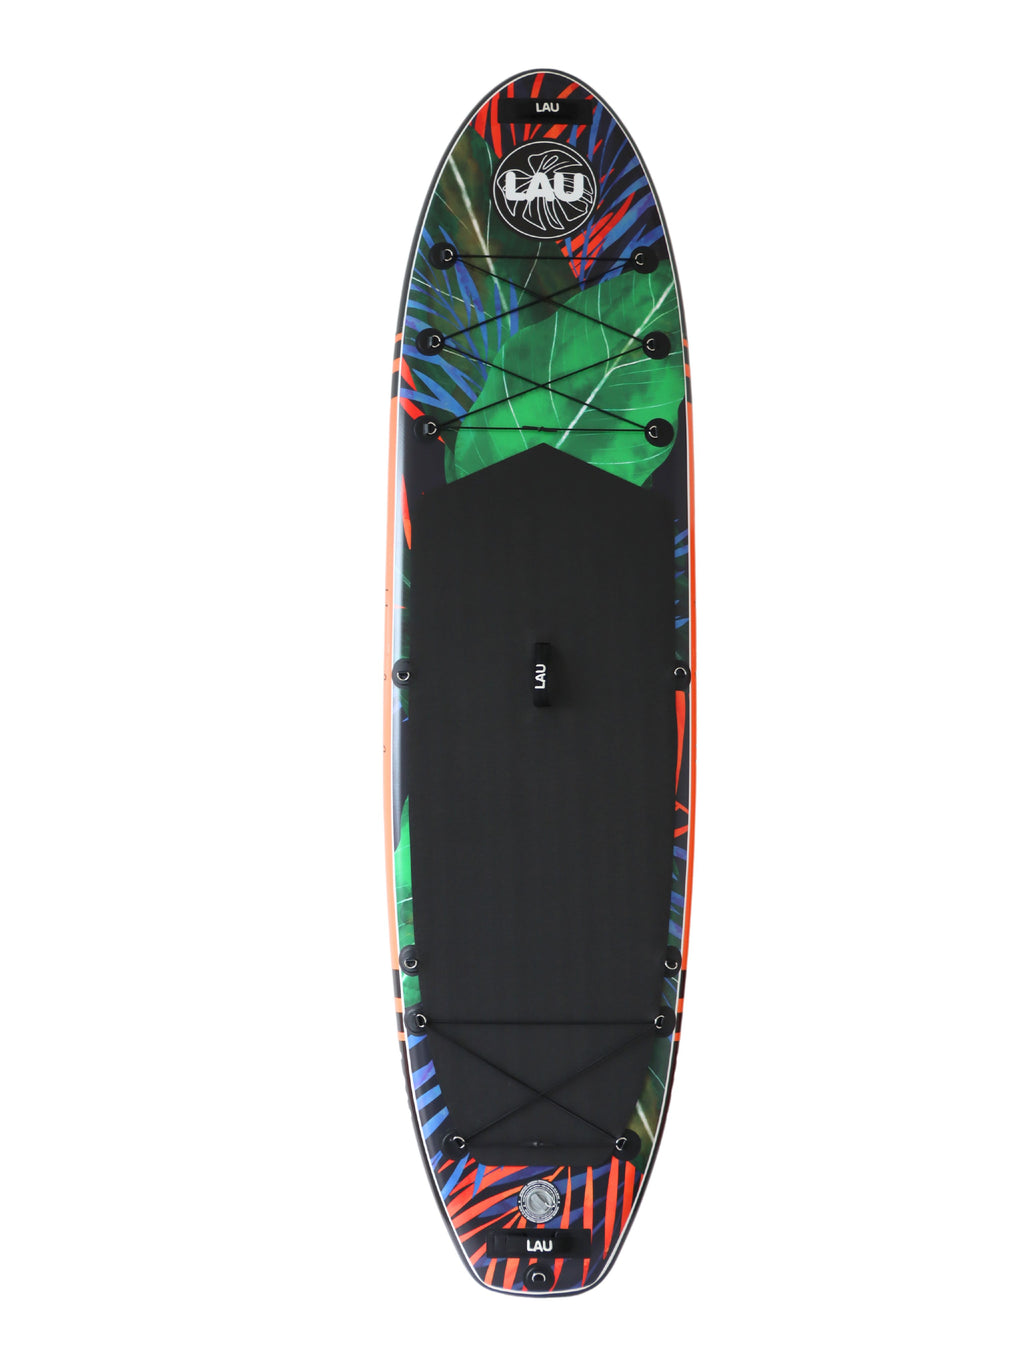 Herbal- 11'6 All-around- Inflatable paddle board